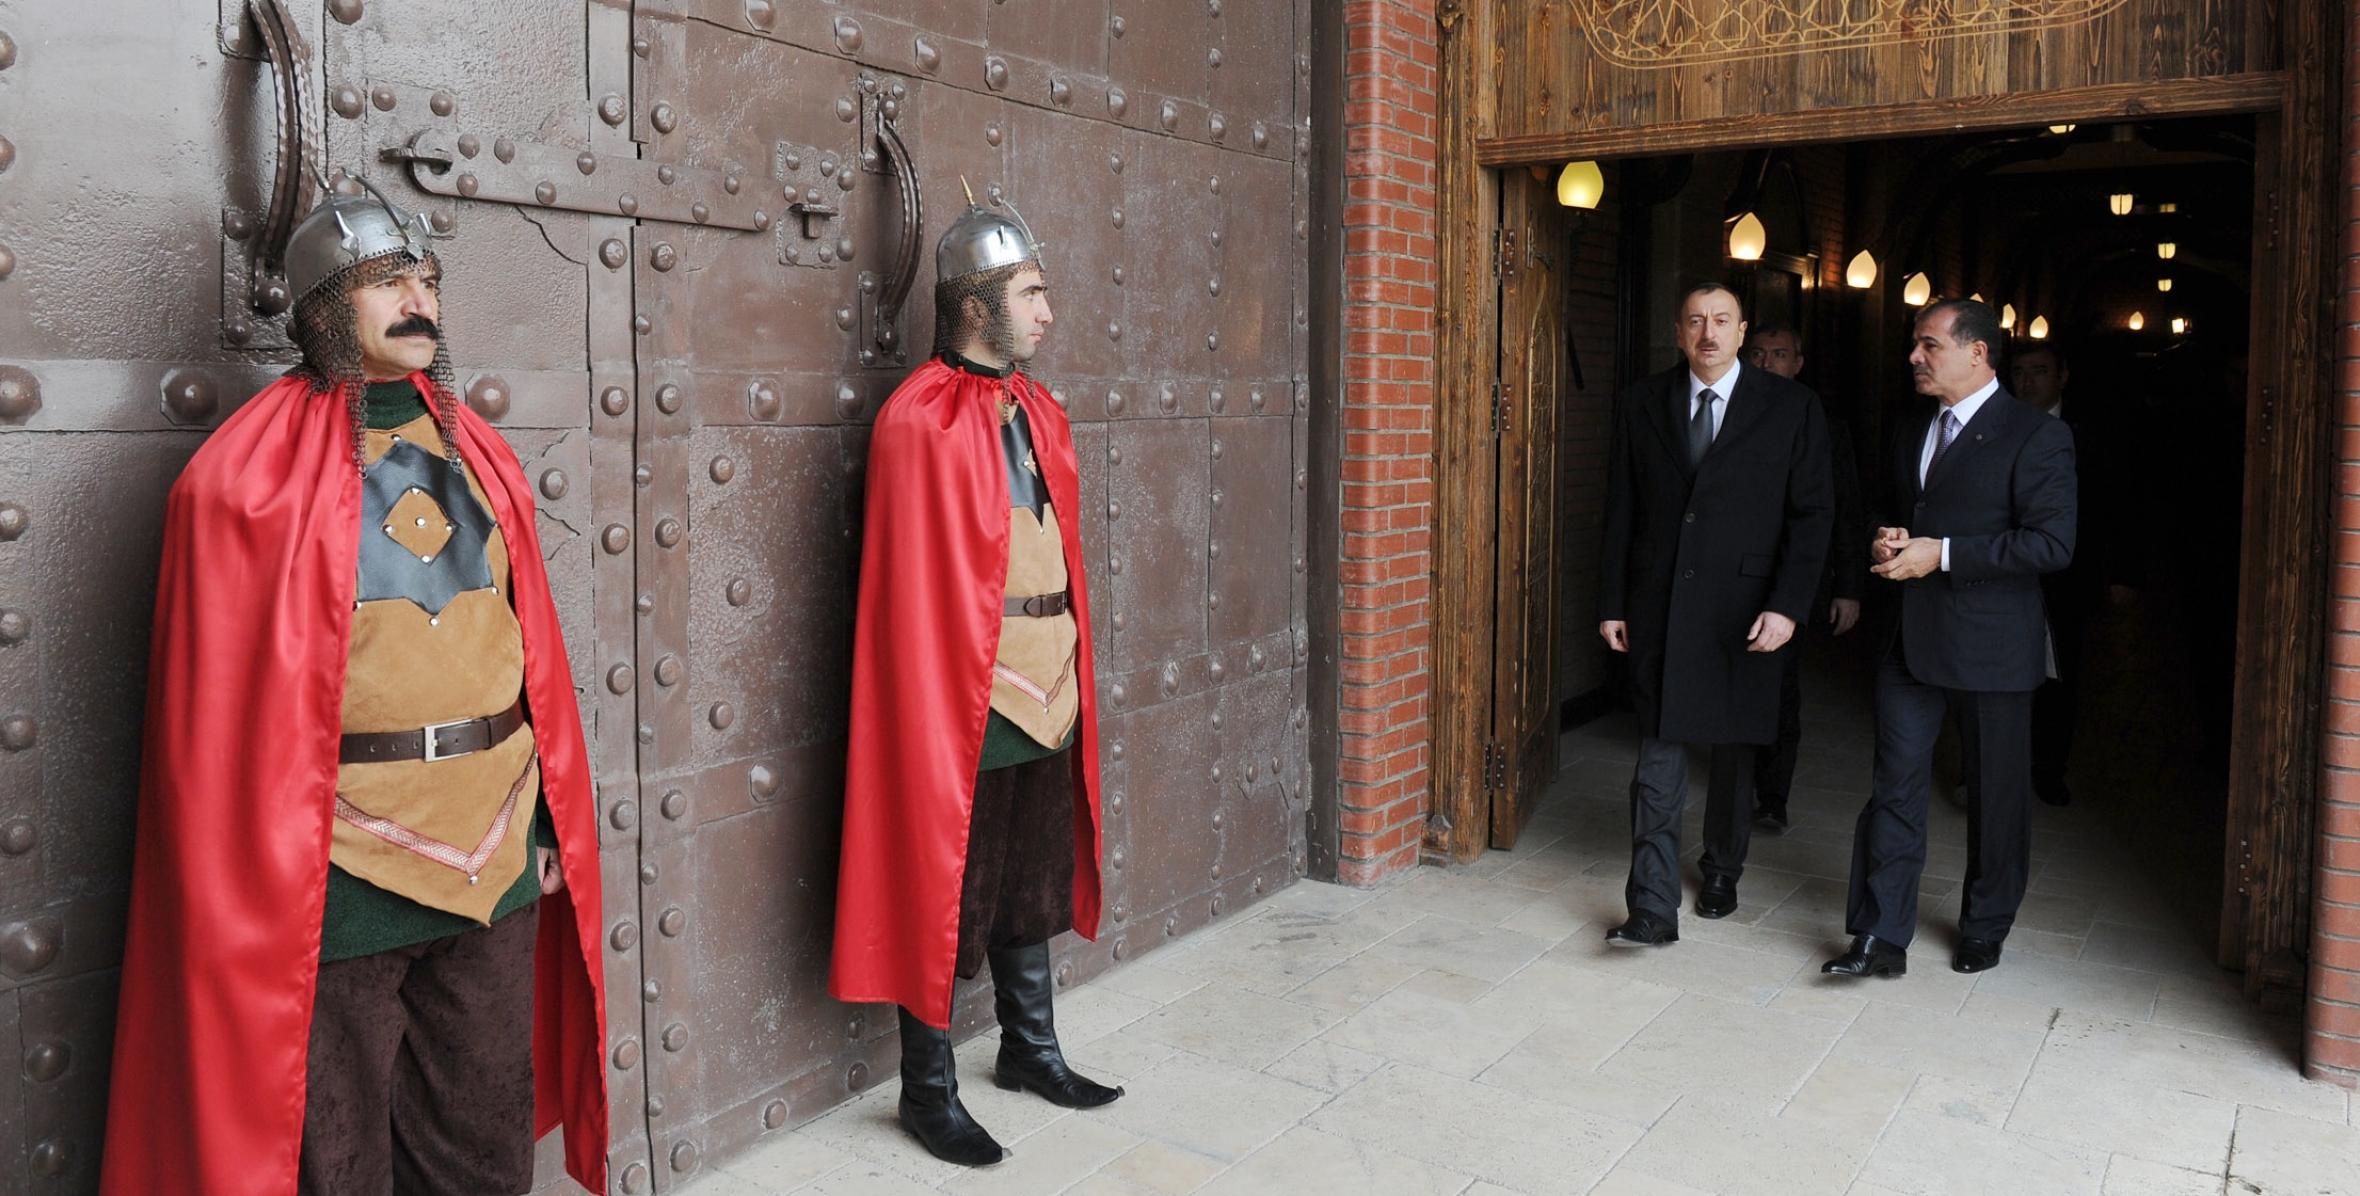 Ilham Aliyev reviewed the monumental complex Ganja Fortress Gates - the Museum of Archeology and Ethnography